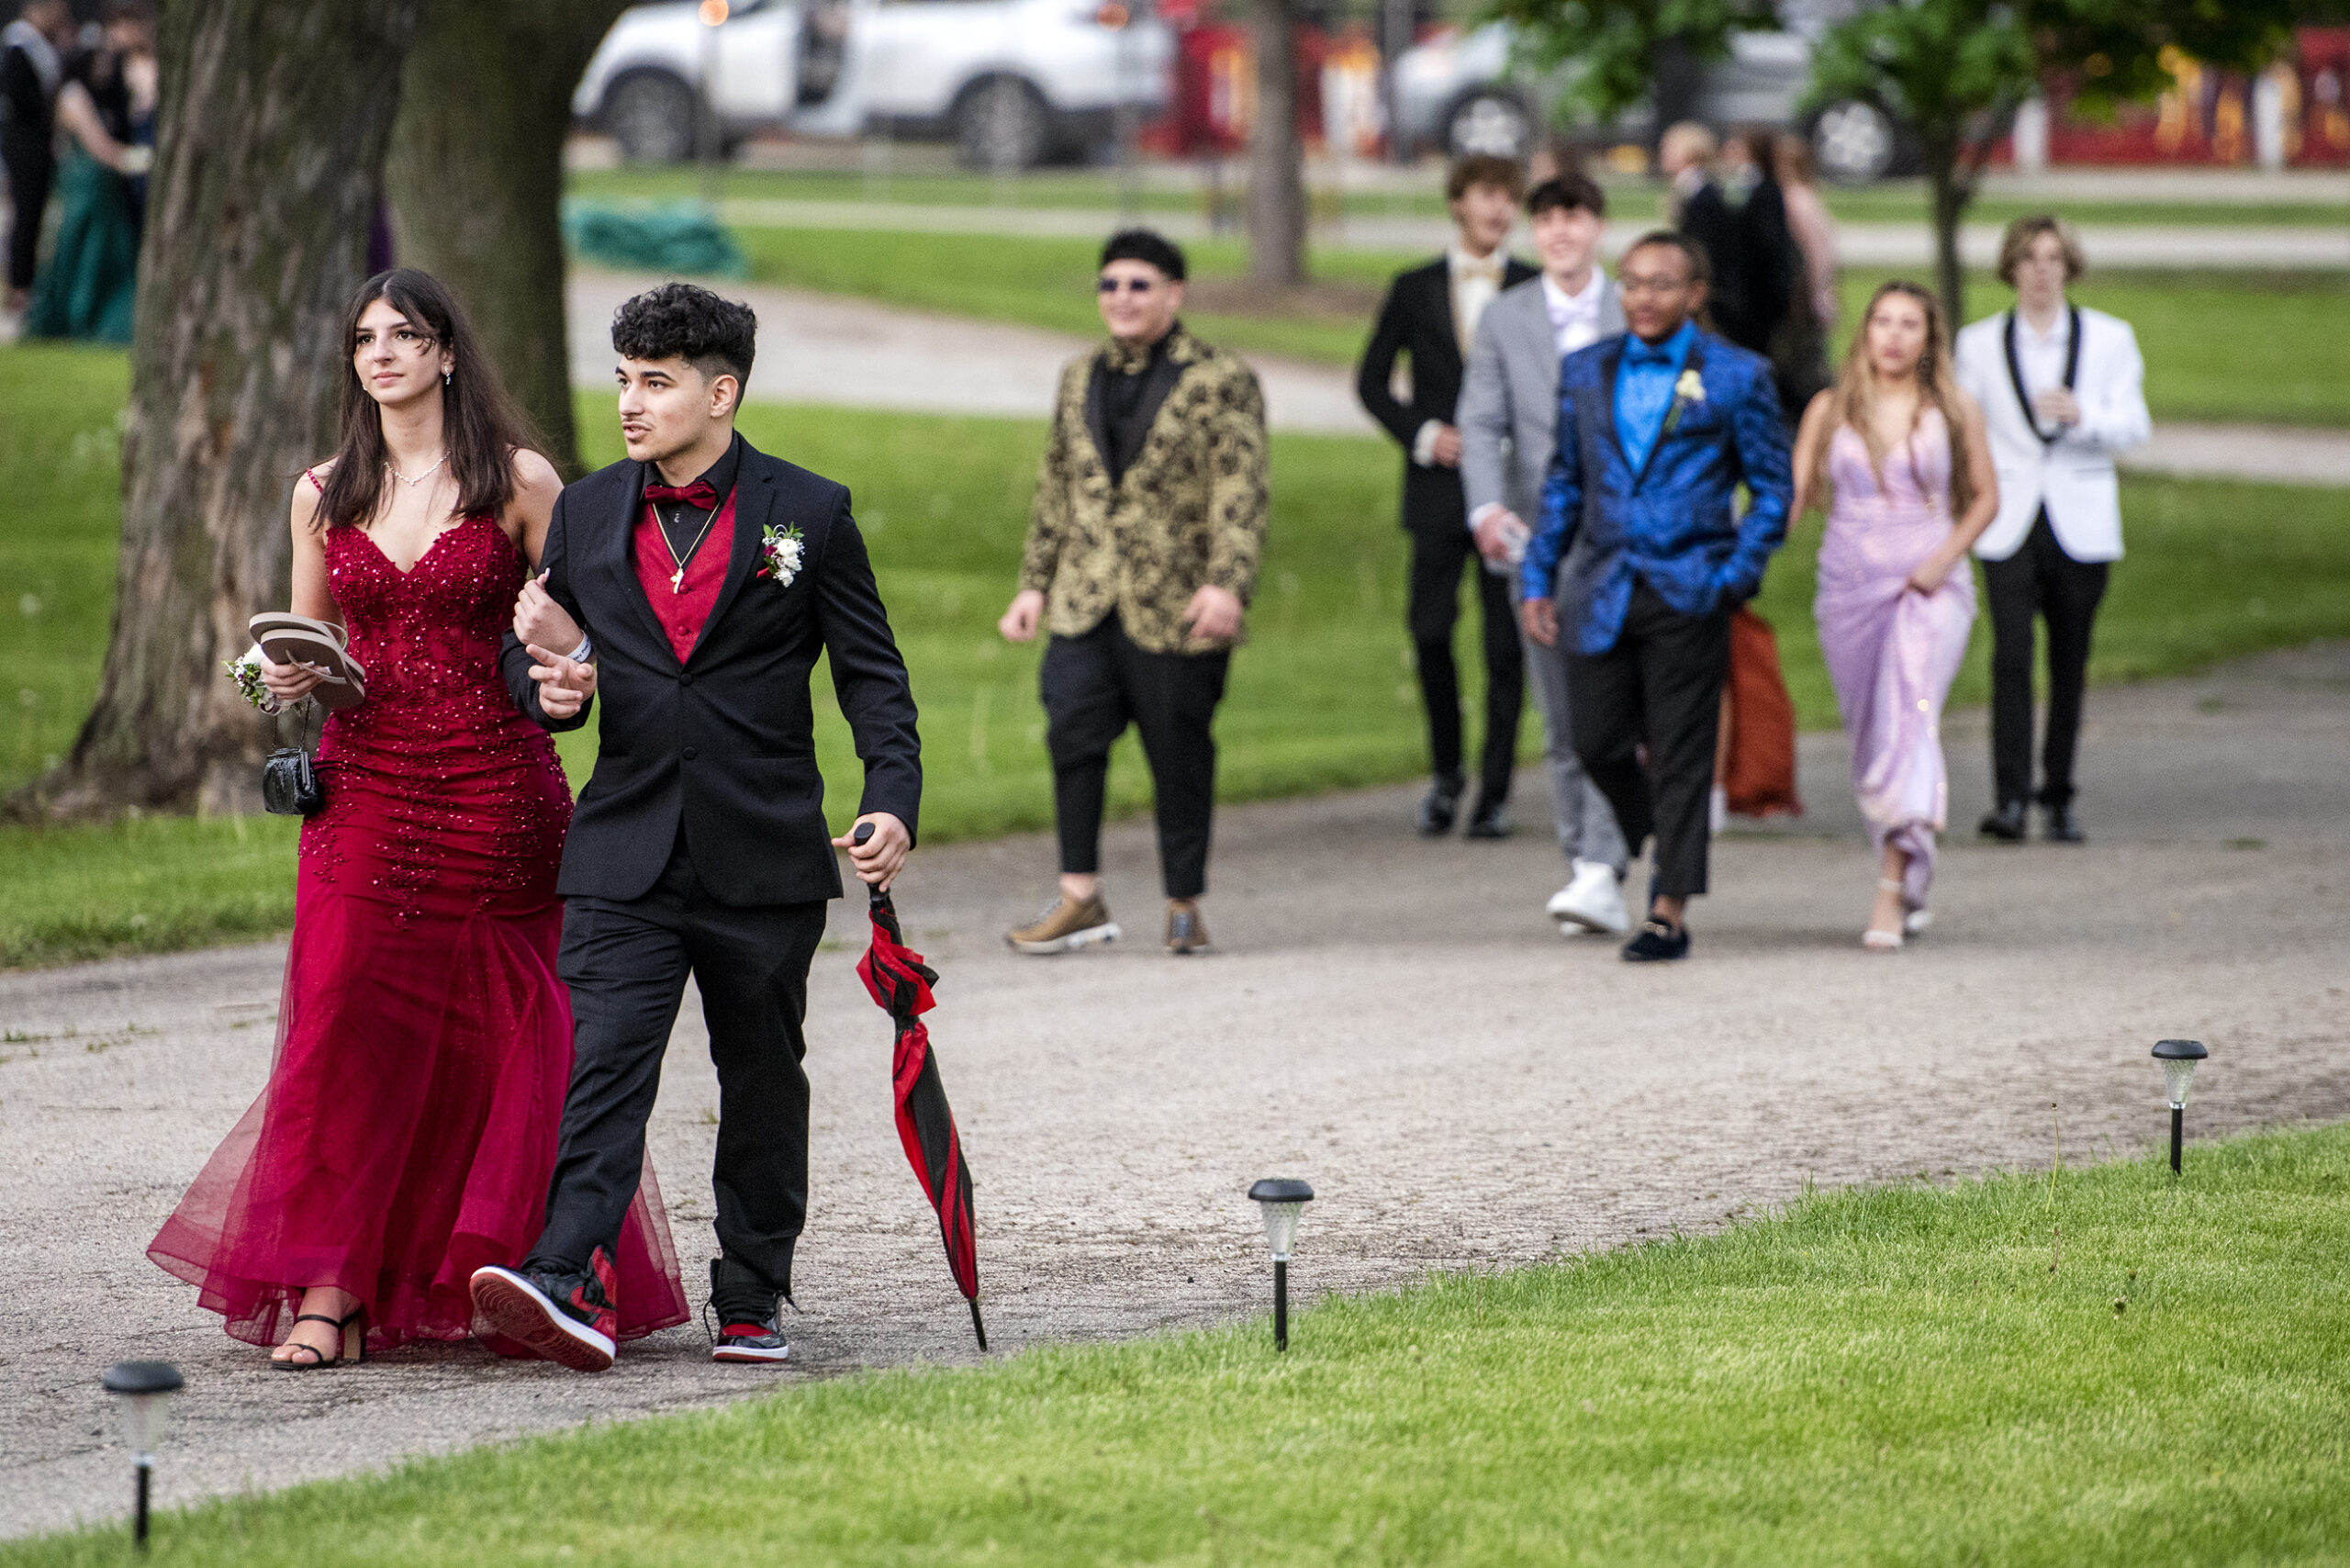 A girl in a dark red gown walks with a boy in a black suit with matching red details.